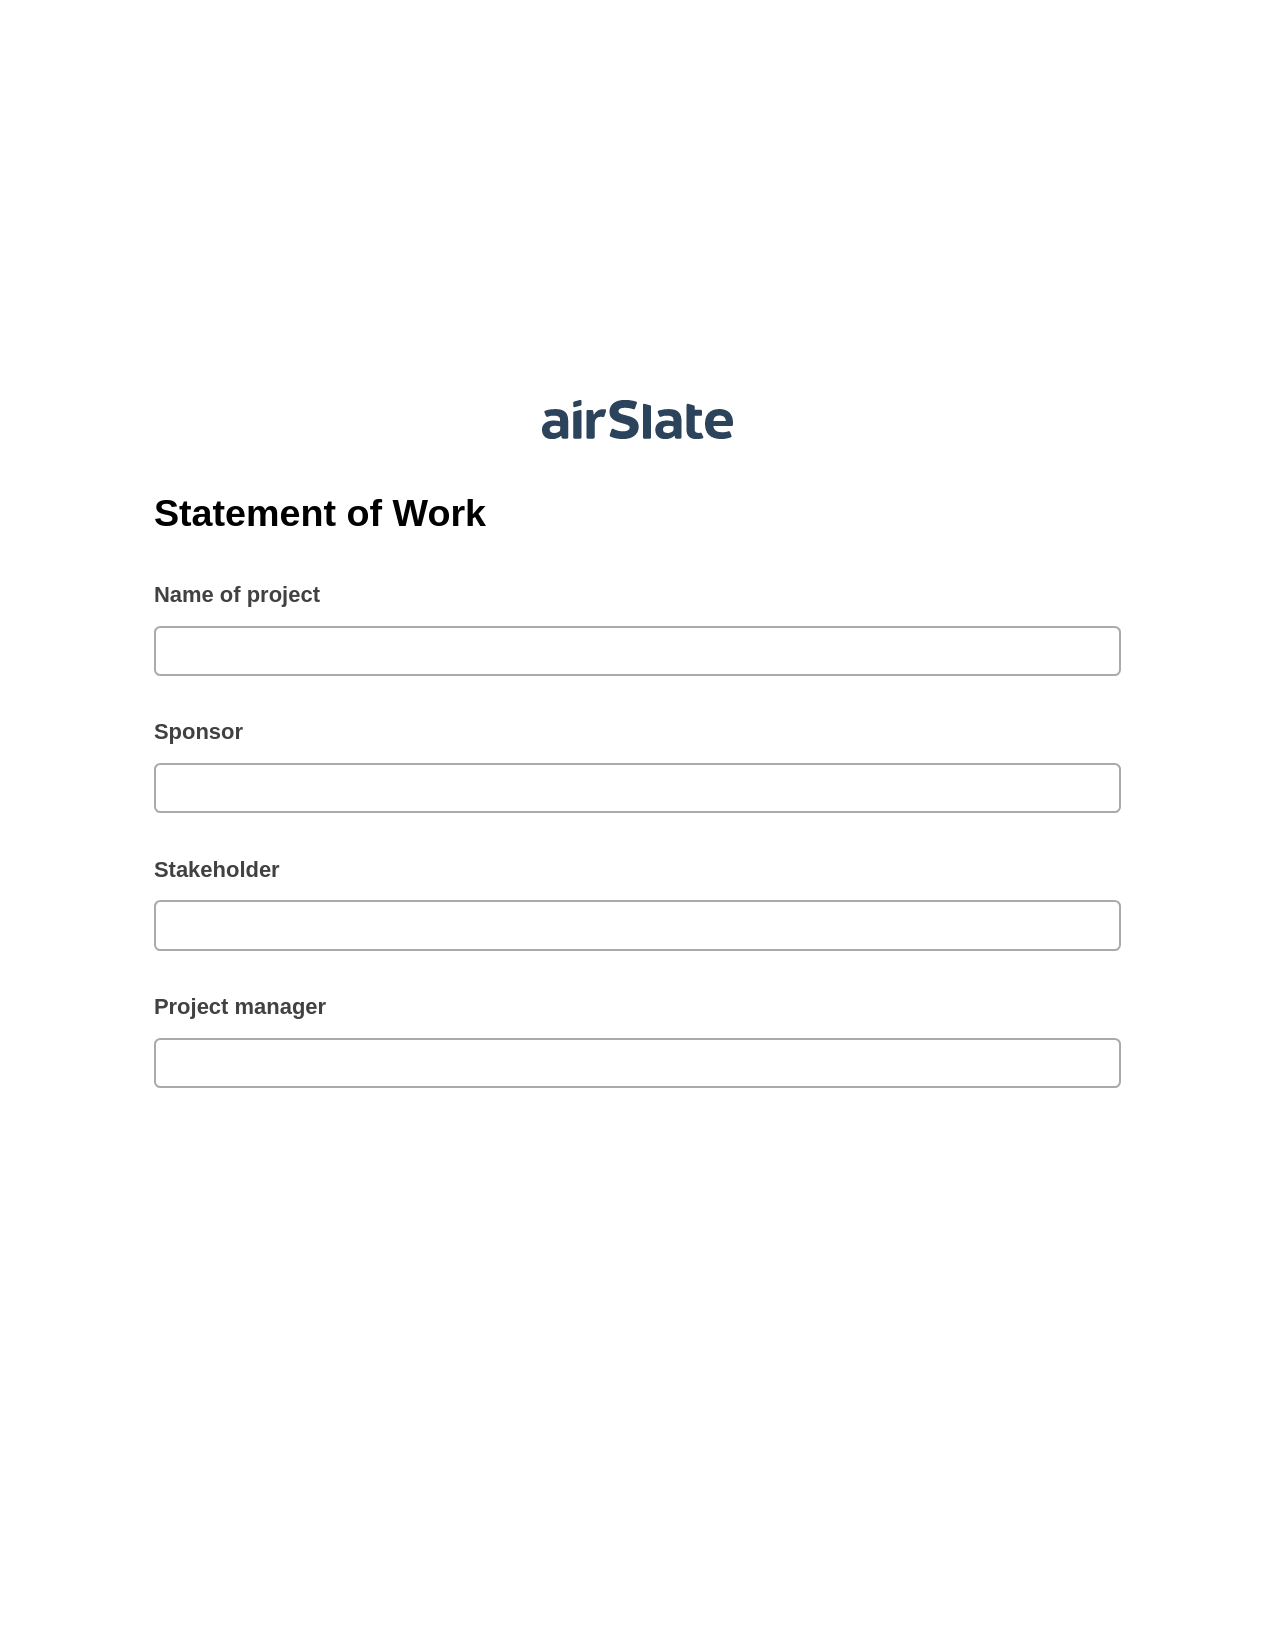 Statement of Work Pre-fill Dropdown from Airtable, System Bot - Create a Slate in another Flow, Webhook Postfinish Bot